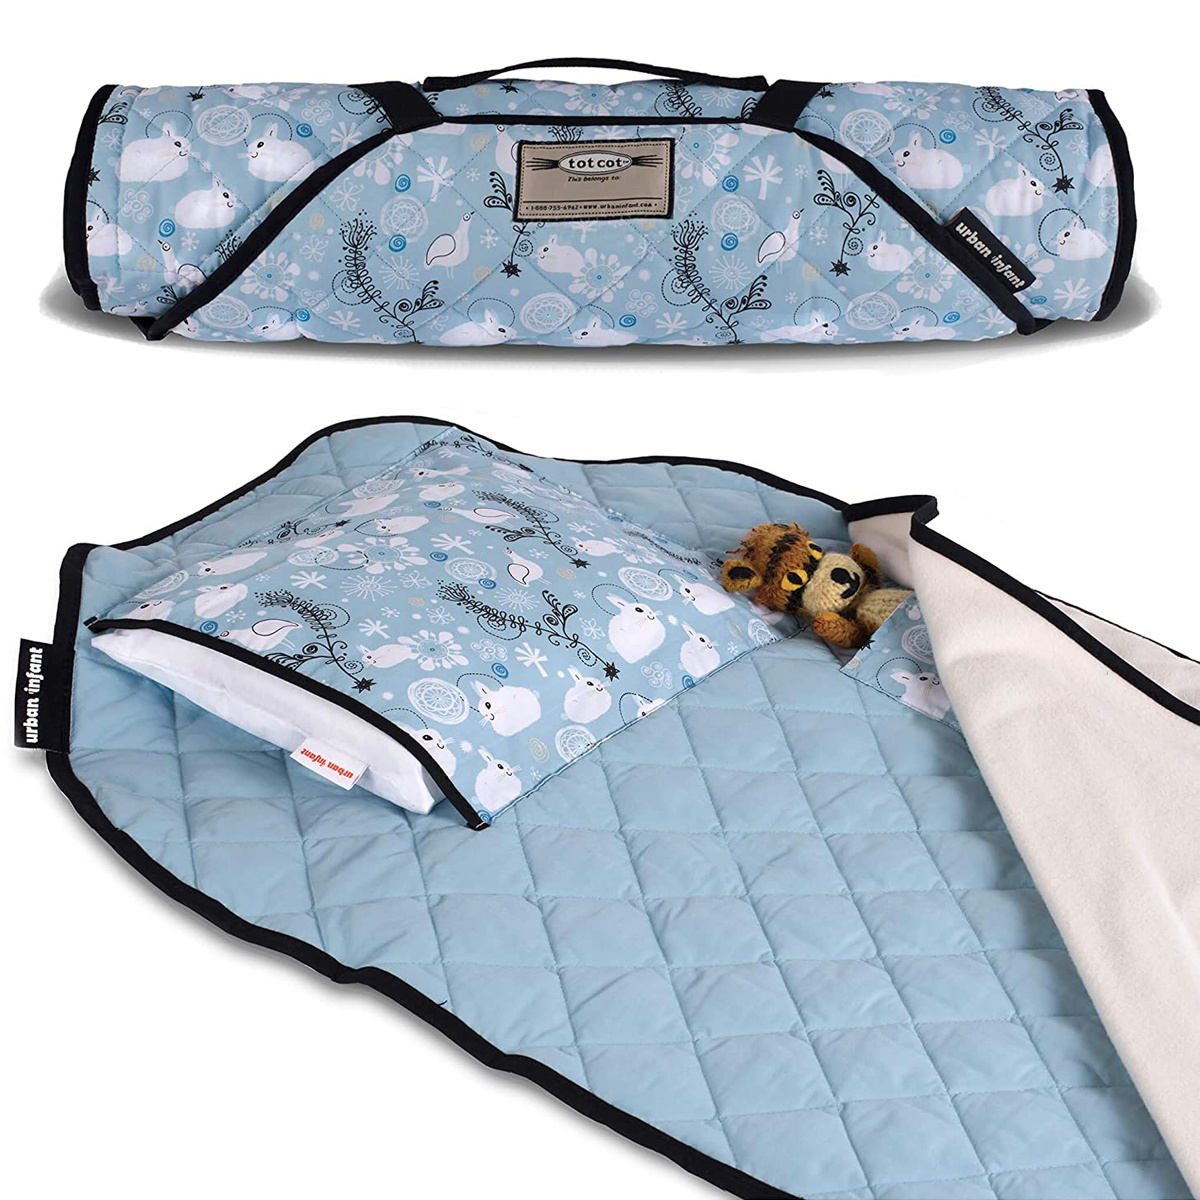 Urban Infant Tot Cot All-in-One Preschool/Daycare Toddler Nap Mat - Bunnies